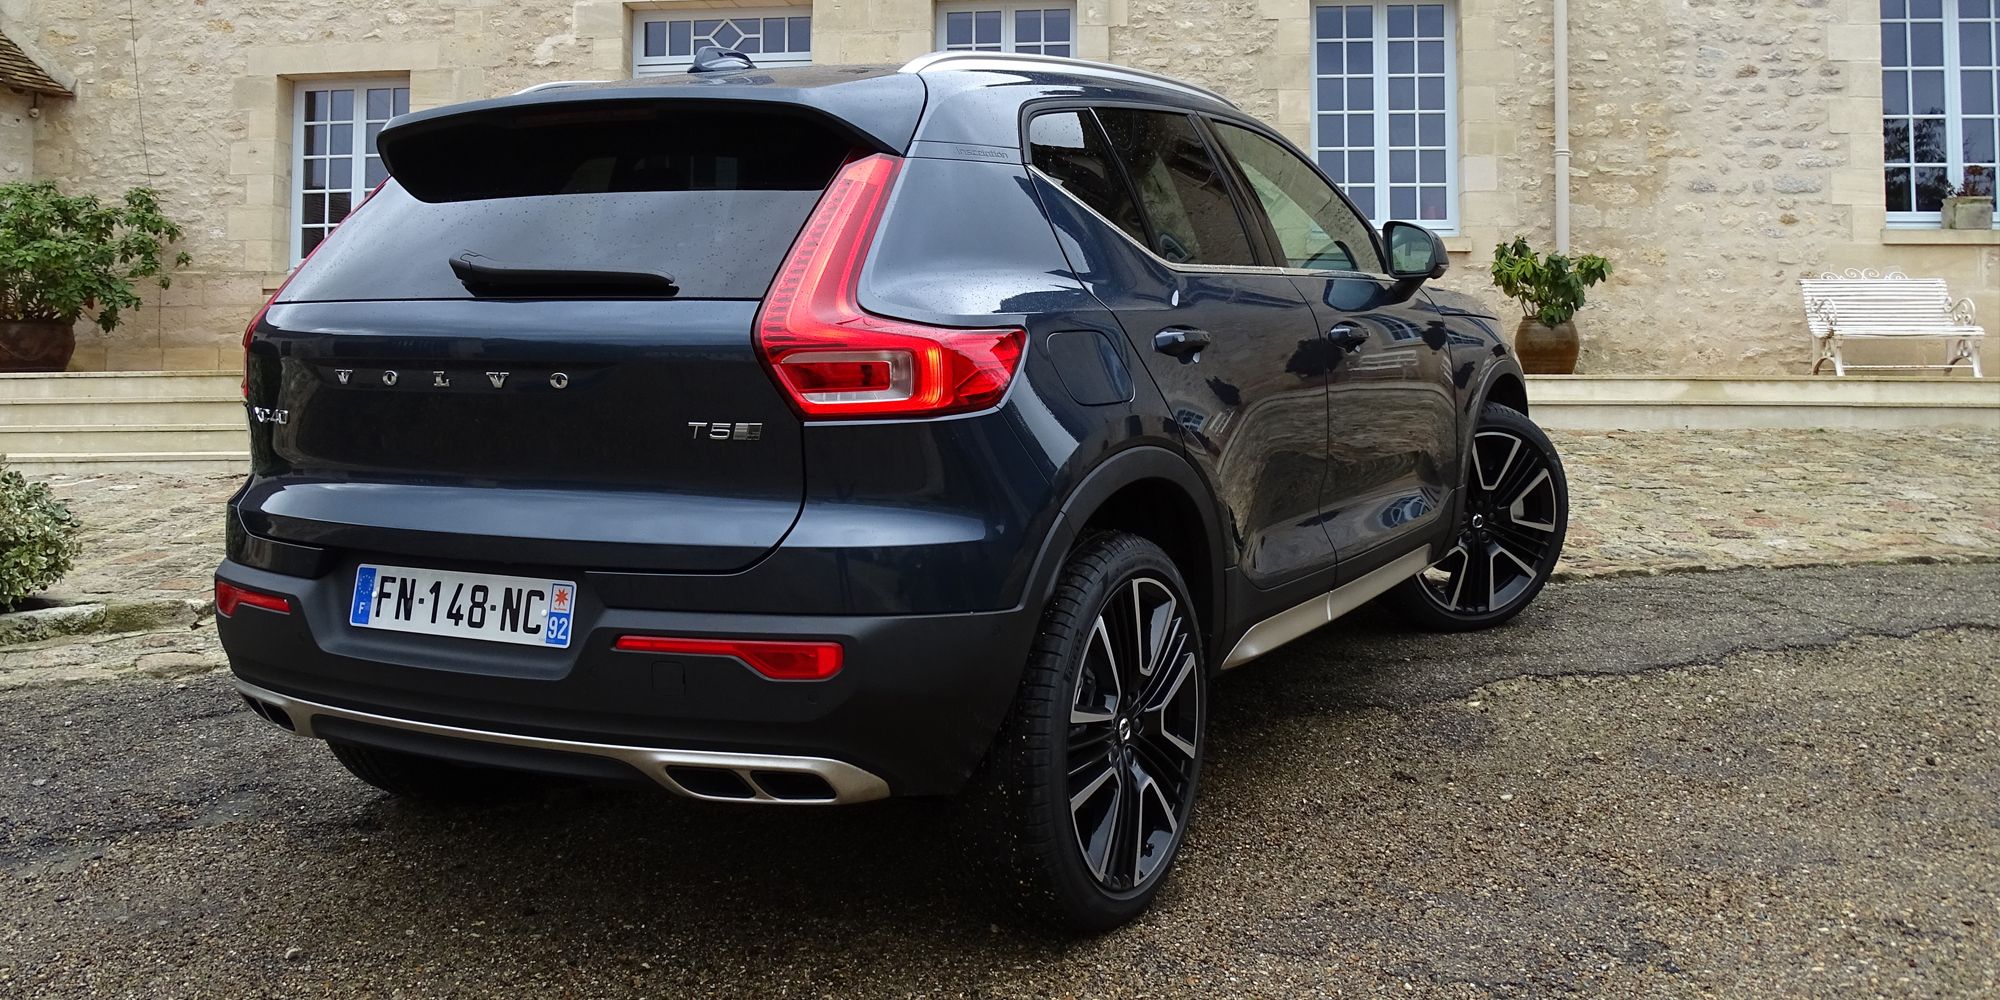 The rear of the XC40 T5